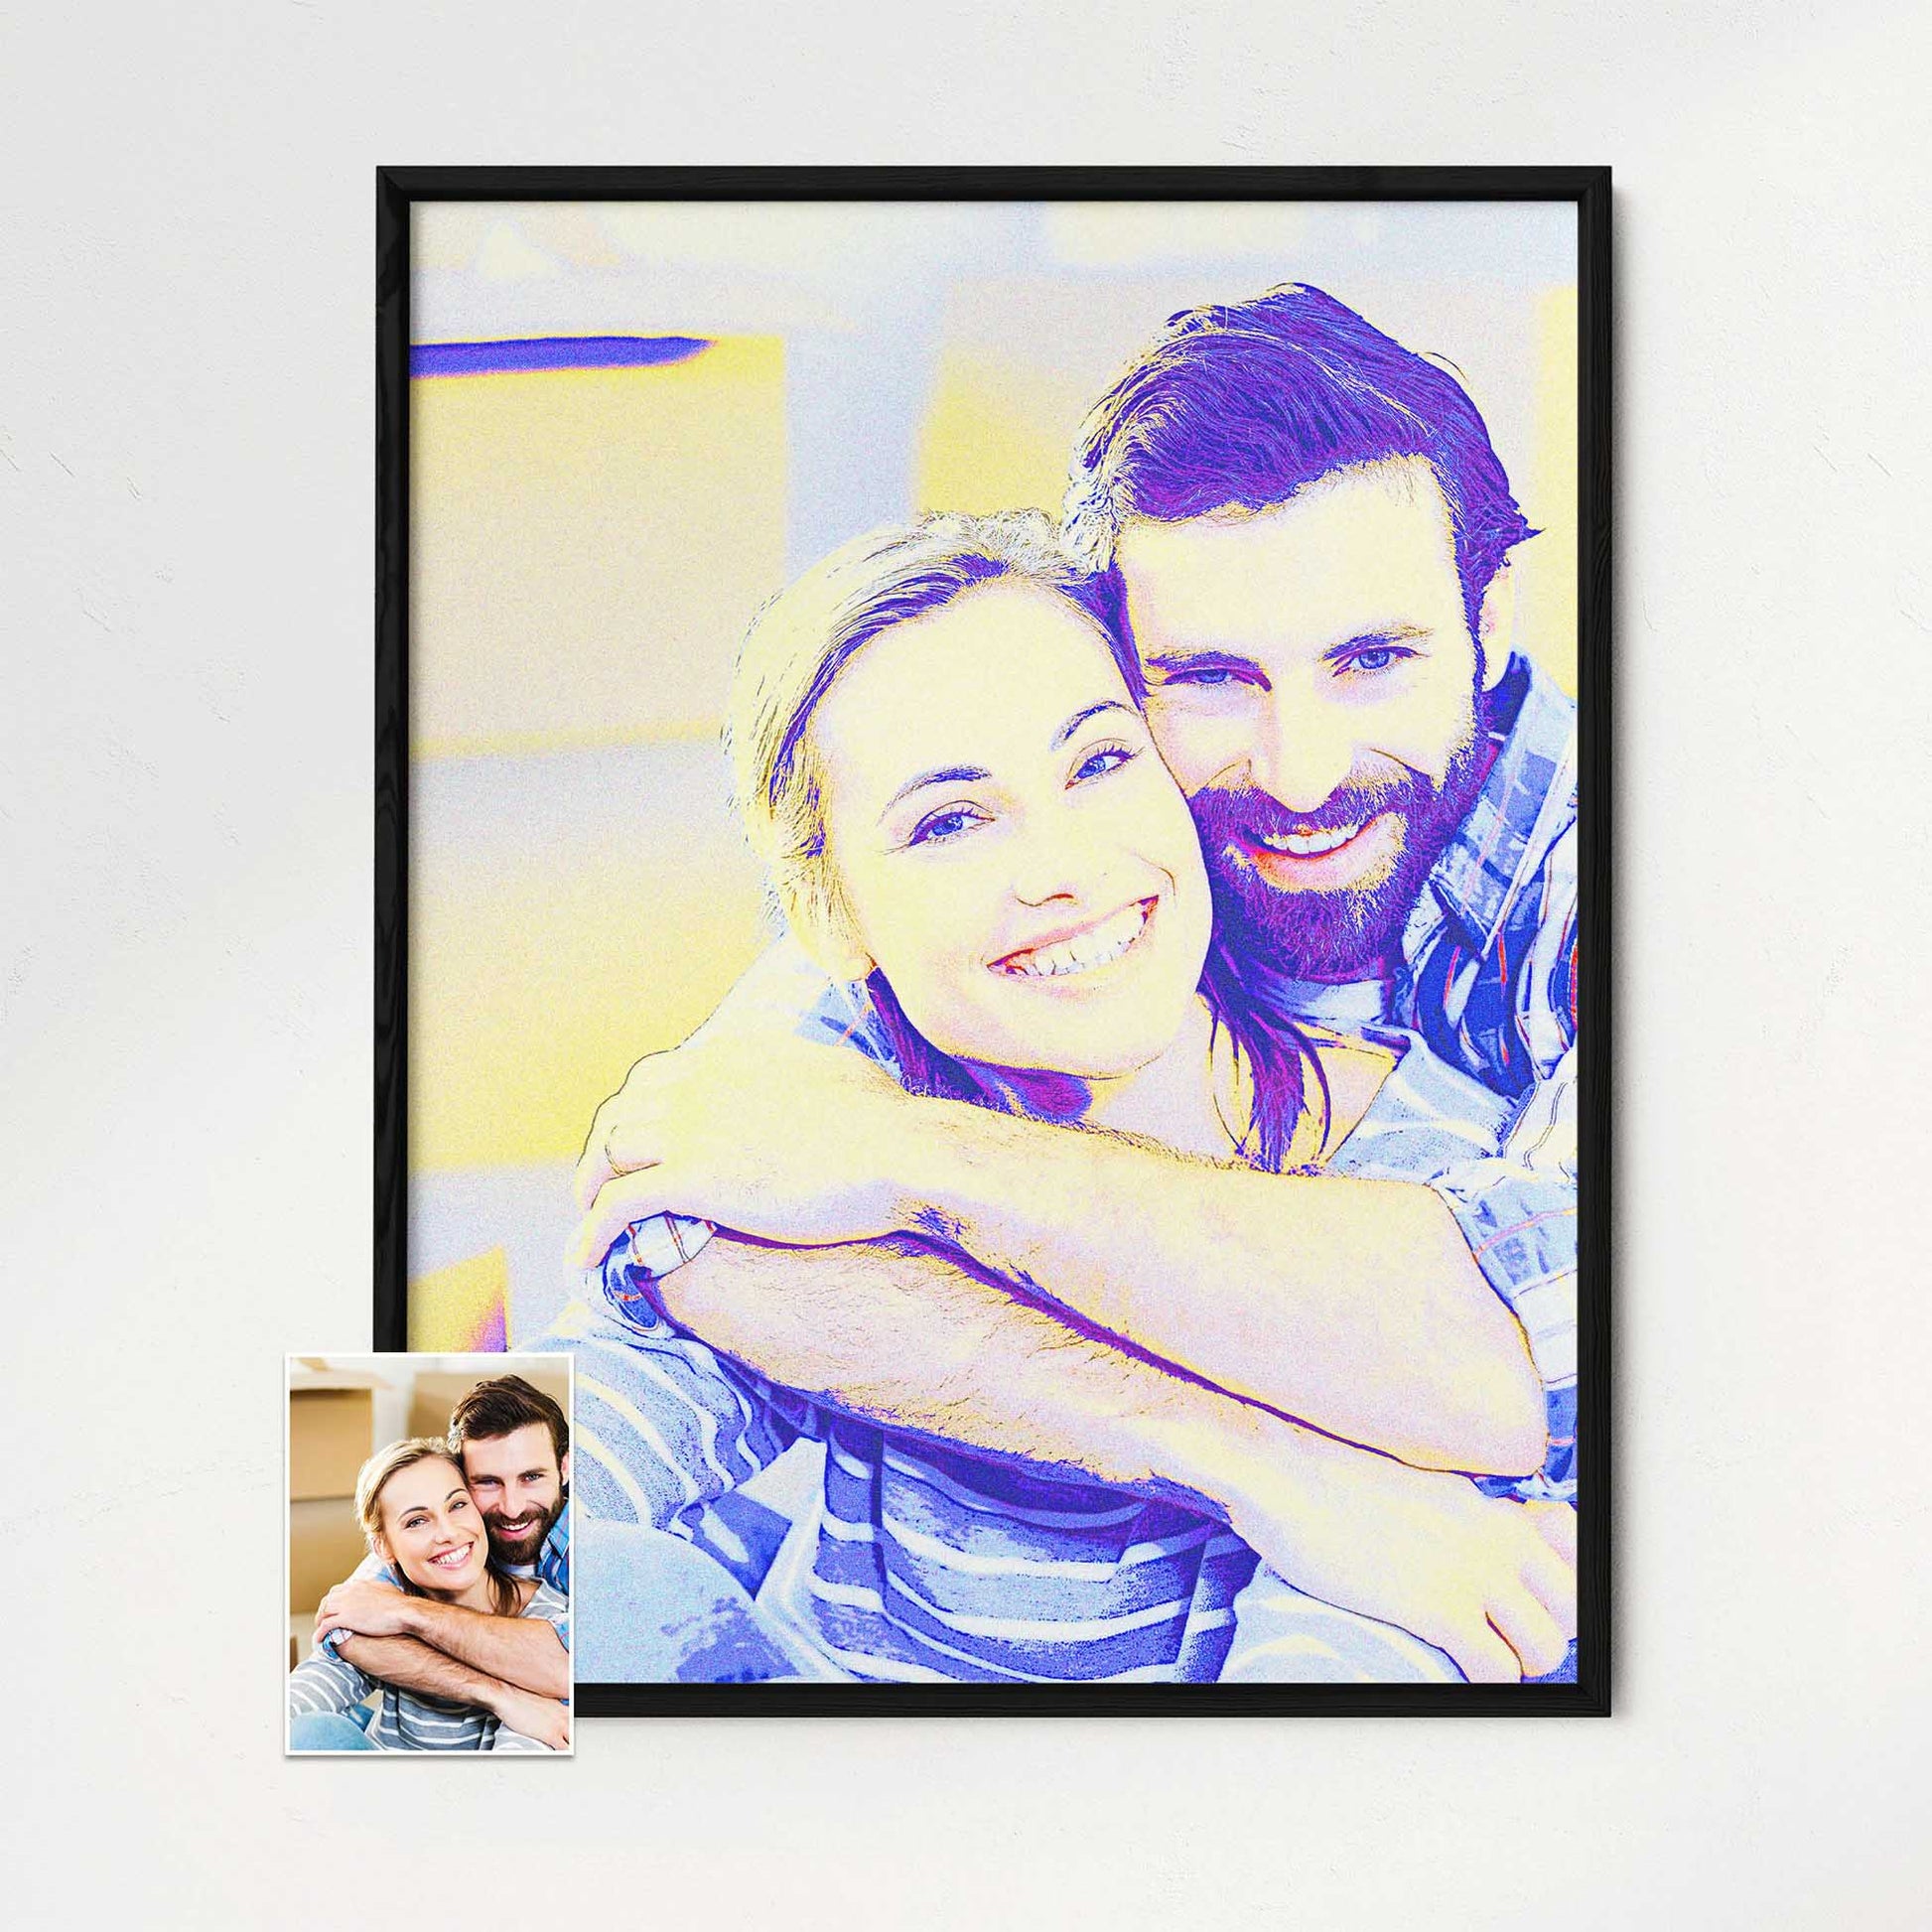 The Personalised Blue & Purple Framed Print is a stunning piece that radiates a vibrant and cool vibe. Its bold and vivid colors bring your photo to life, capturing the essence of your special moments, wooden frame and printed 